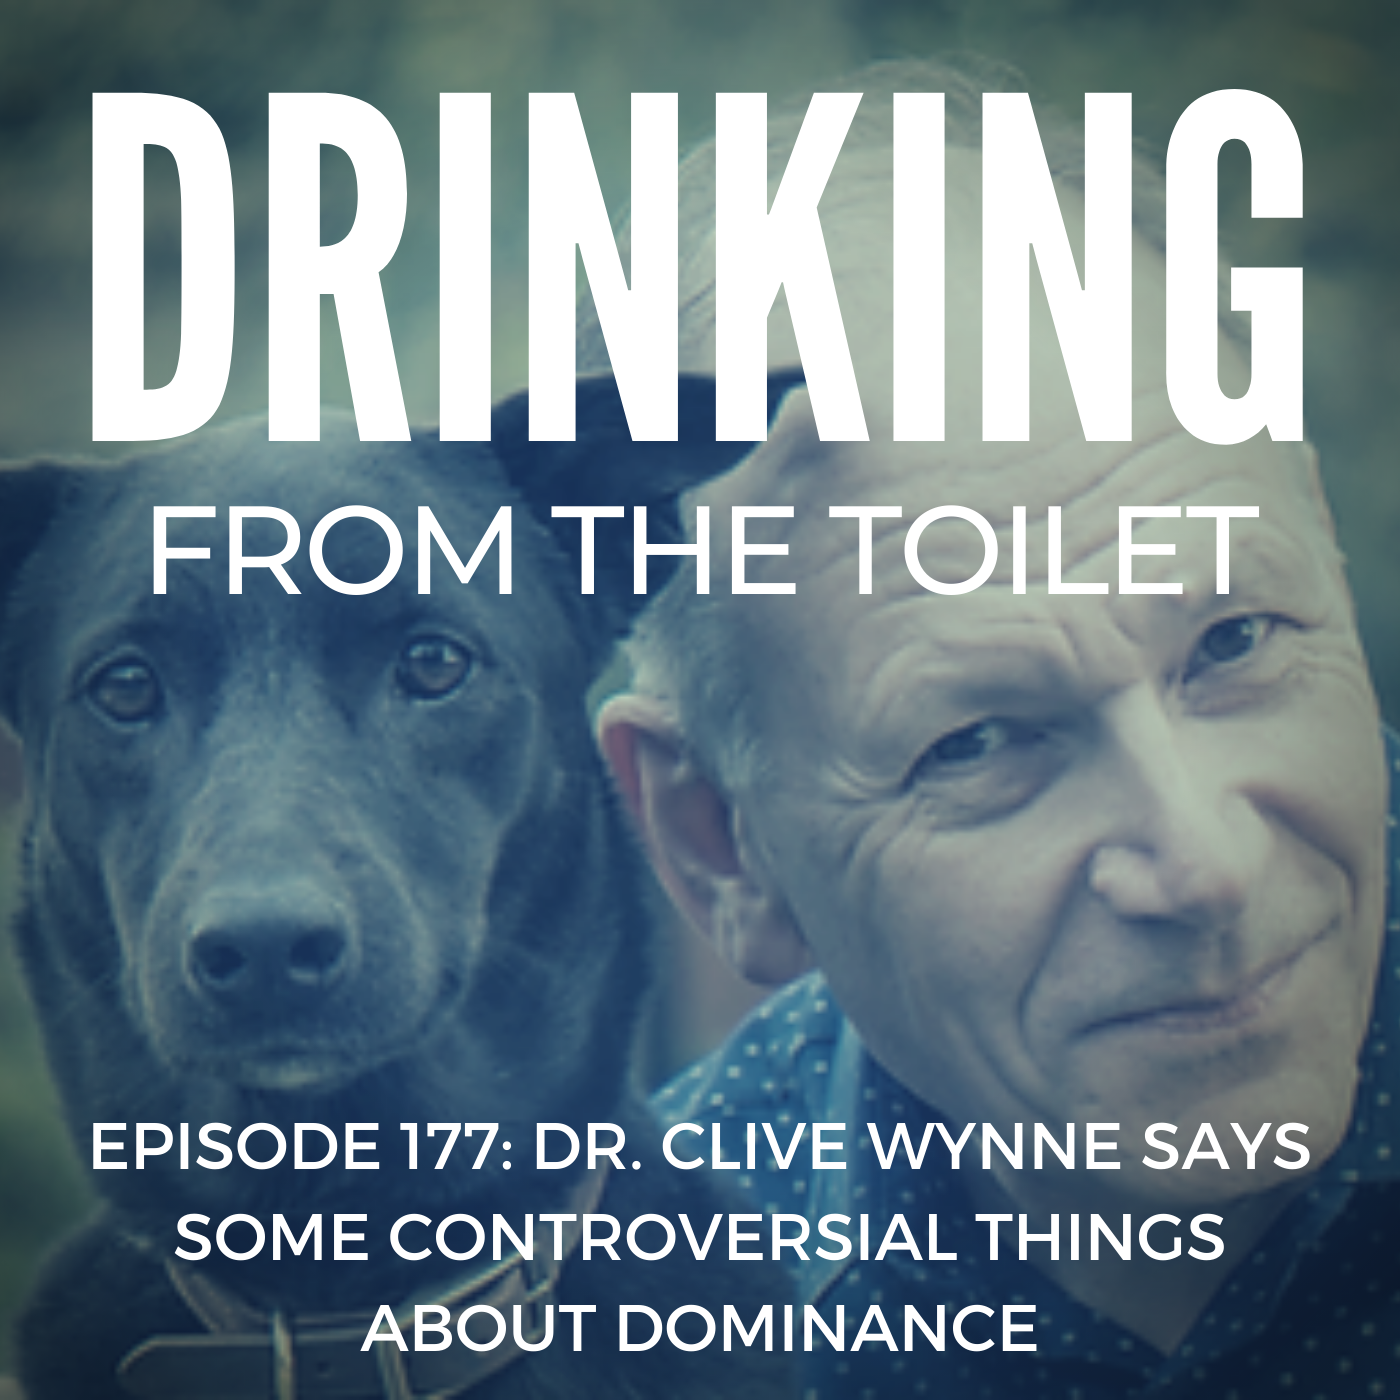 Podcast #177: Dr. Clive Wynne Says Some Controversial Things About Dominance